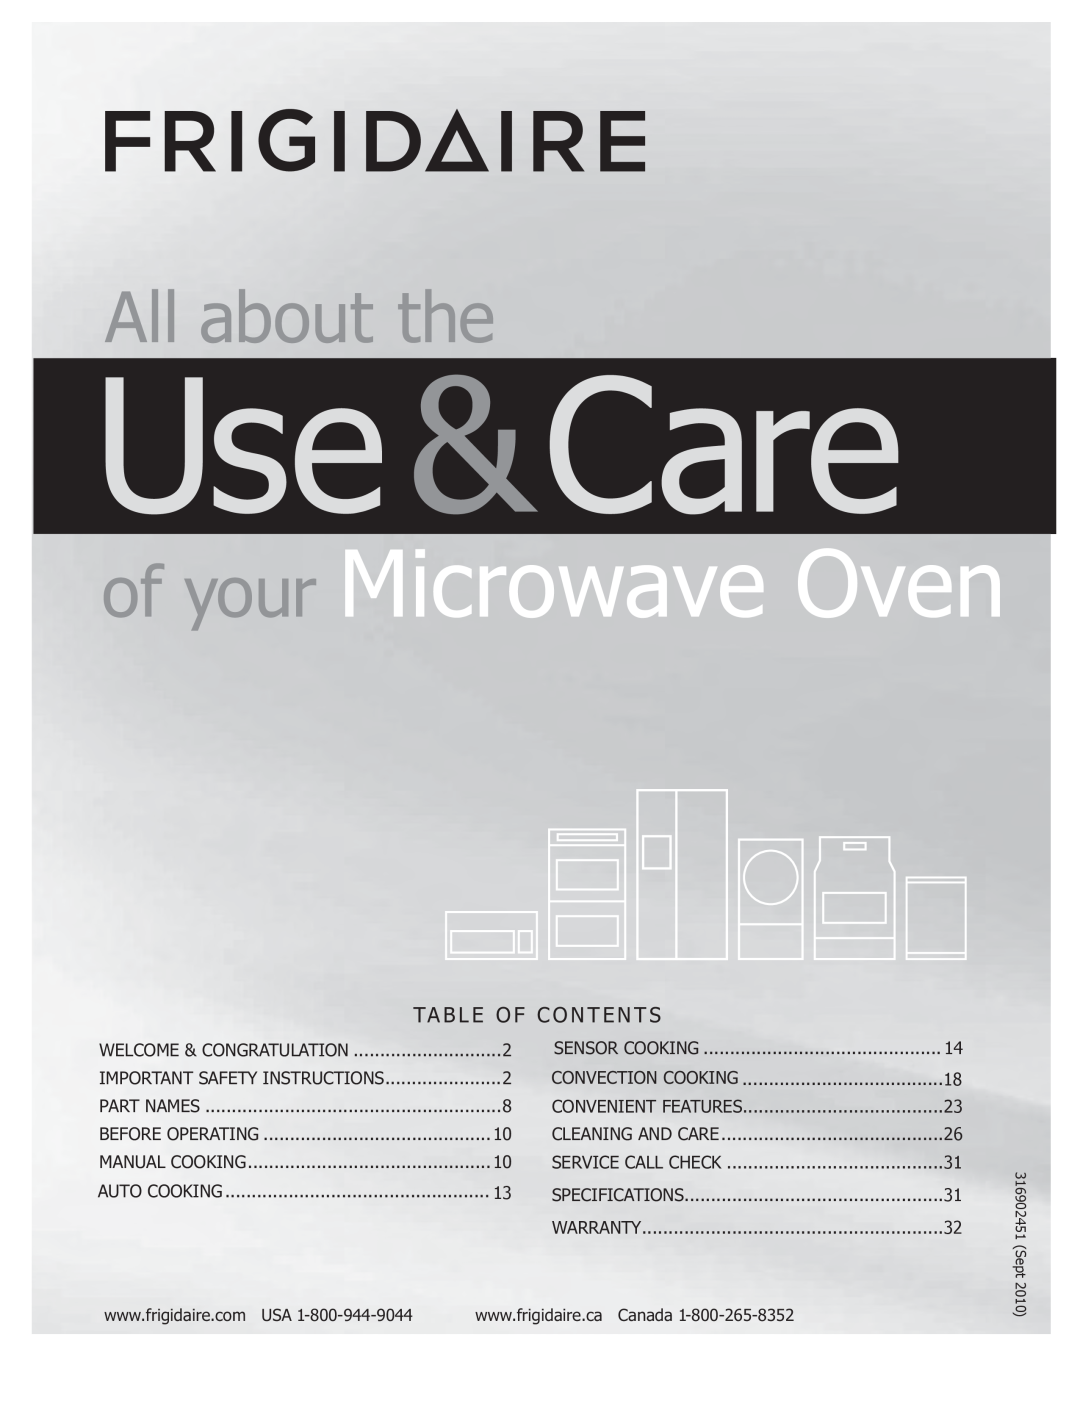 Frigidaire FGMV154CLF, FGMV153CLB important safety instructions Use &Care, of your Microwave Oven, All about the 